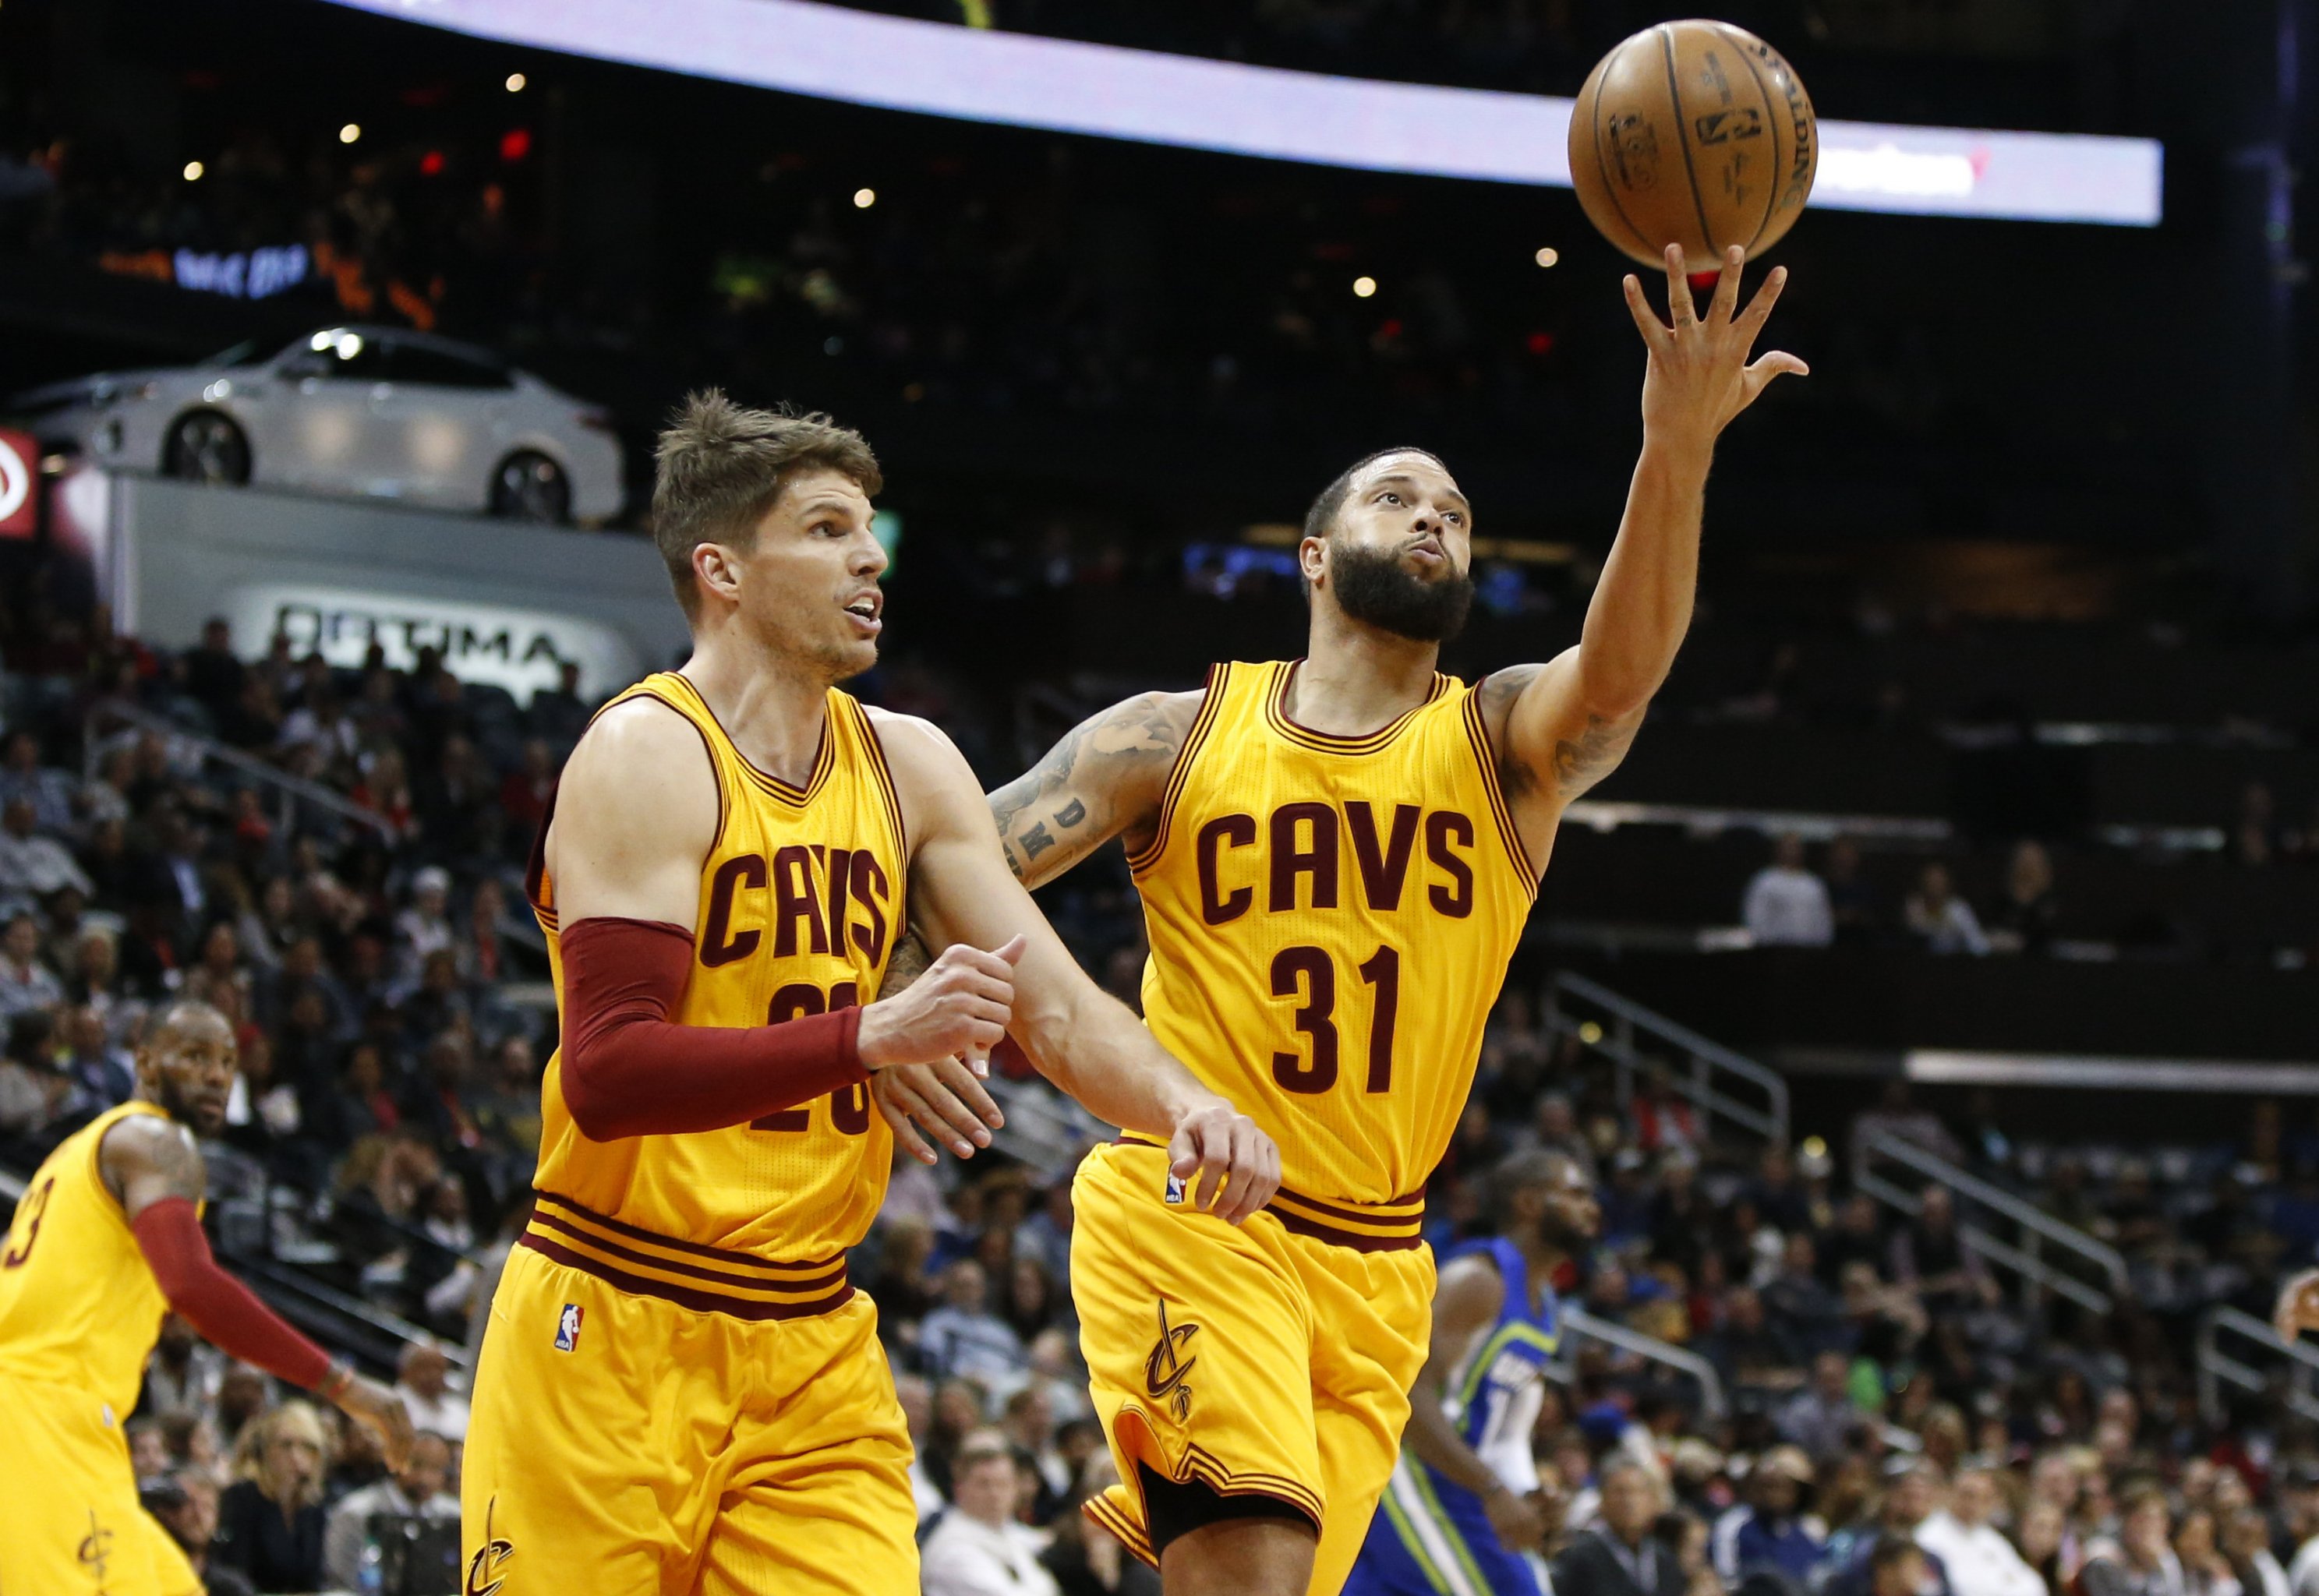 Report: Every Player On Cavs Roster Is Available For Trade, 51% OFF